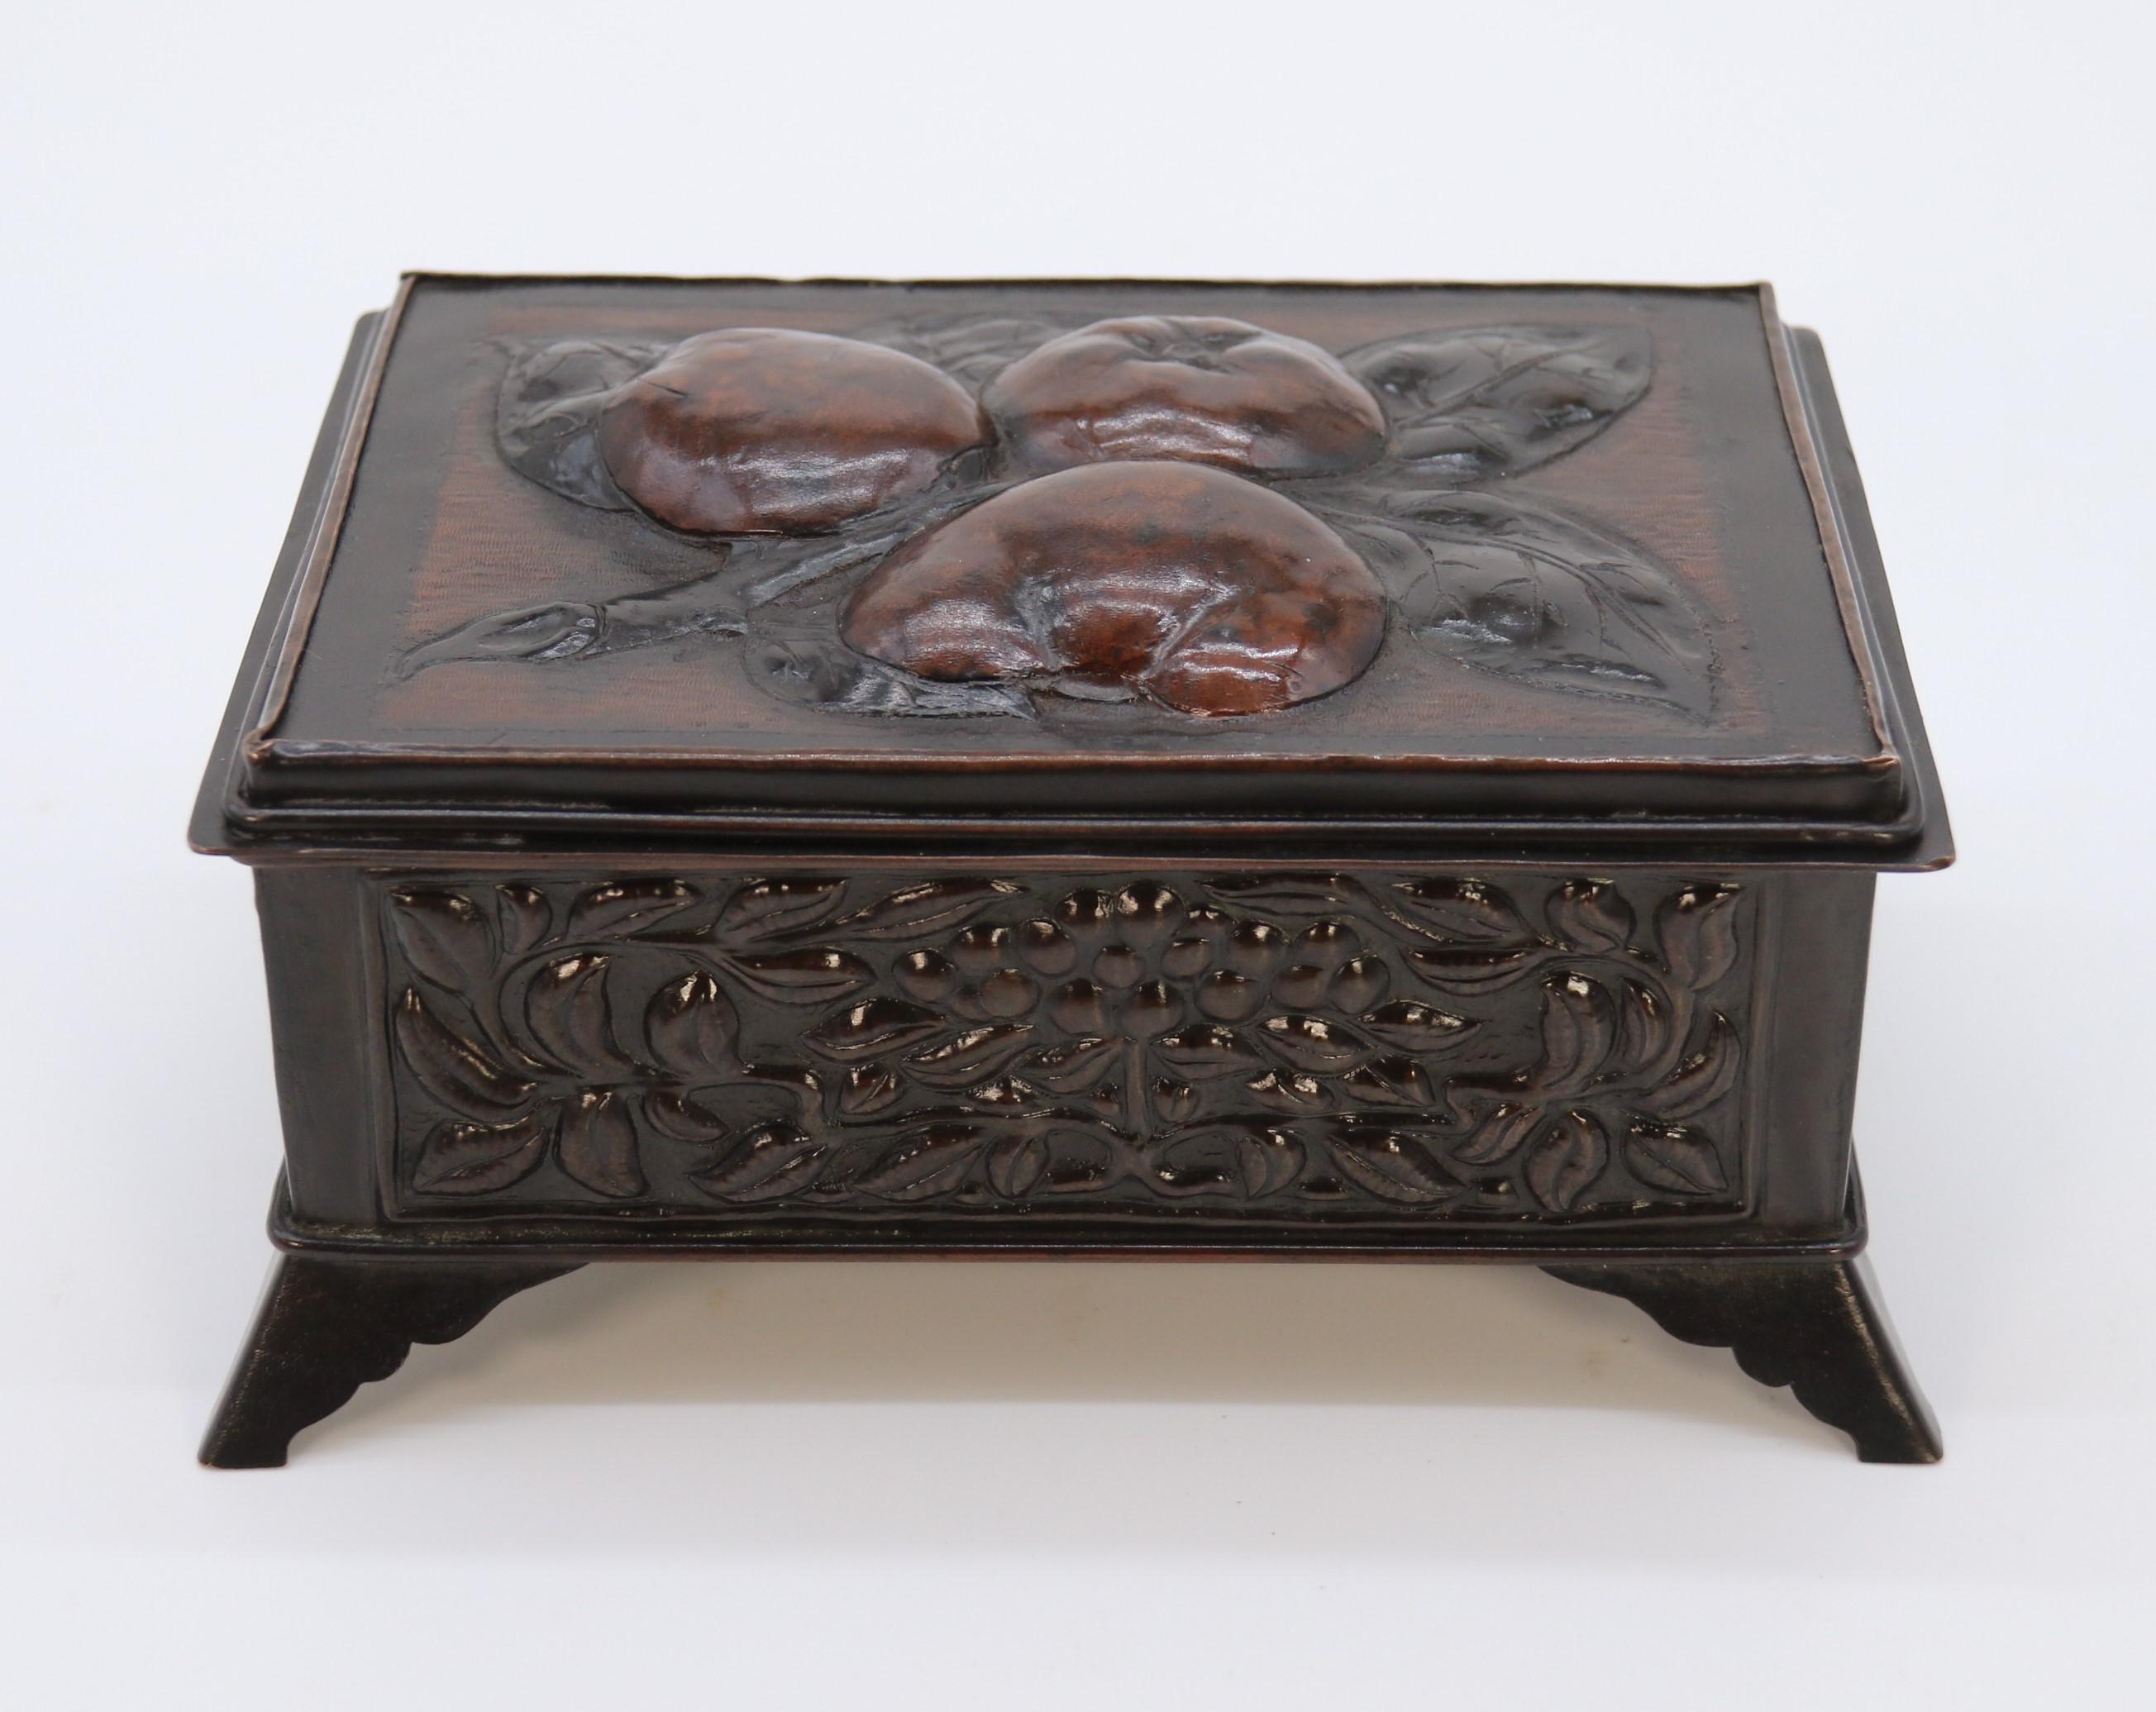 This very stylish and sharply executed handmade copper box dates to the late 19th century. It is raised up onto splayed shaped bracket feet which are attached to the base which is finished with a neat small rolled edge. The front face of the box is